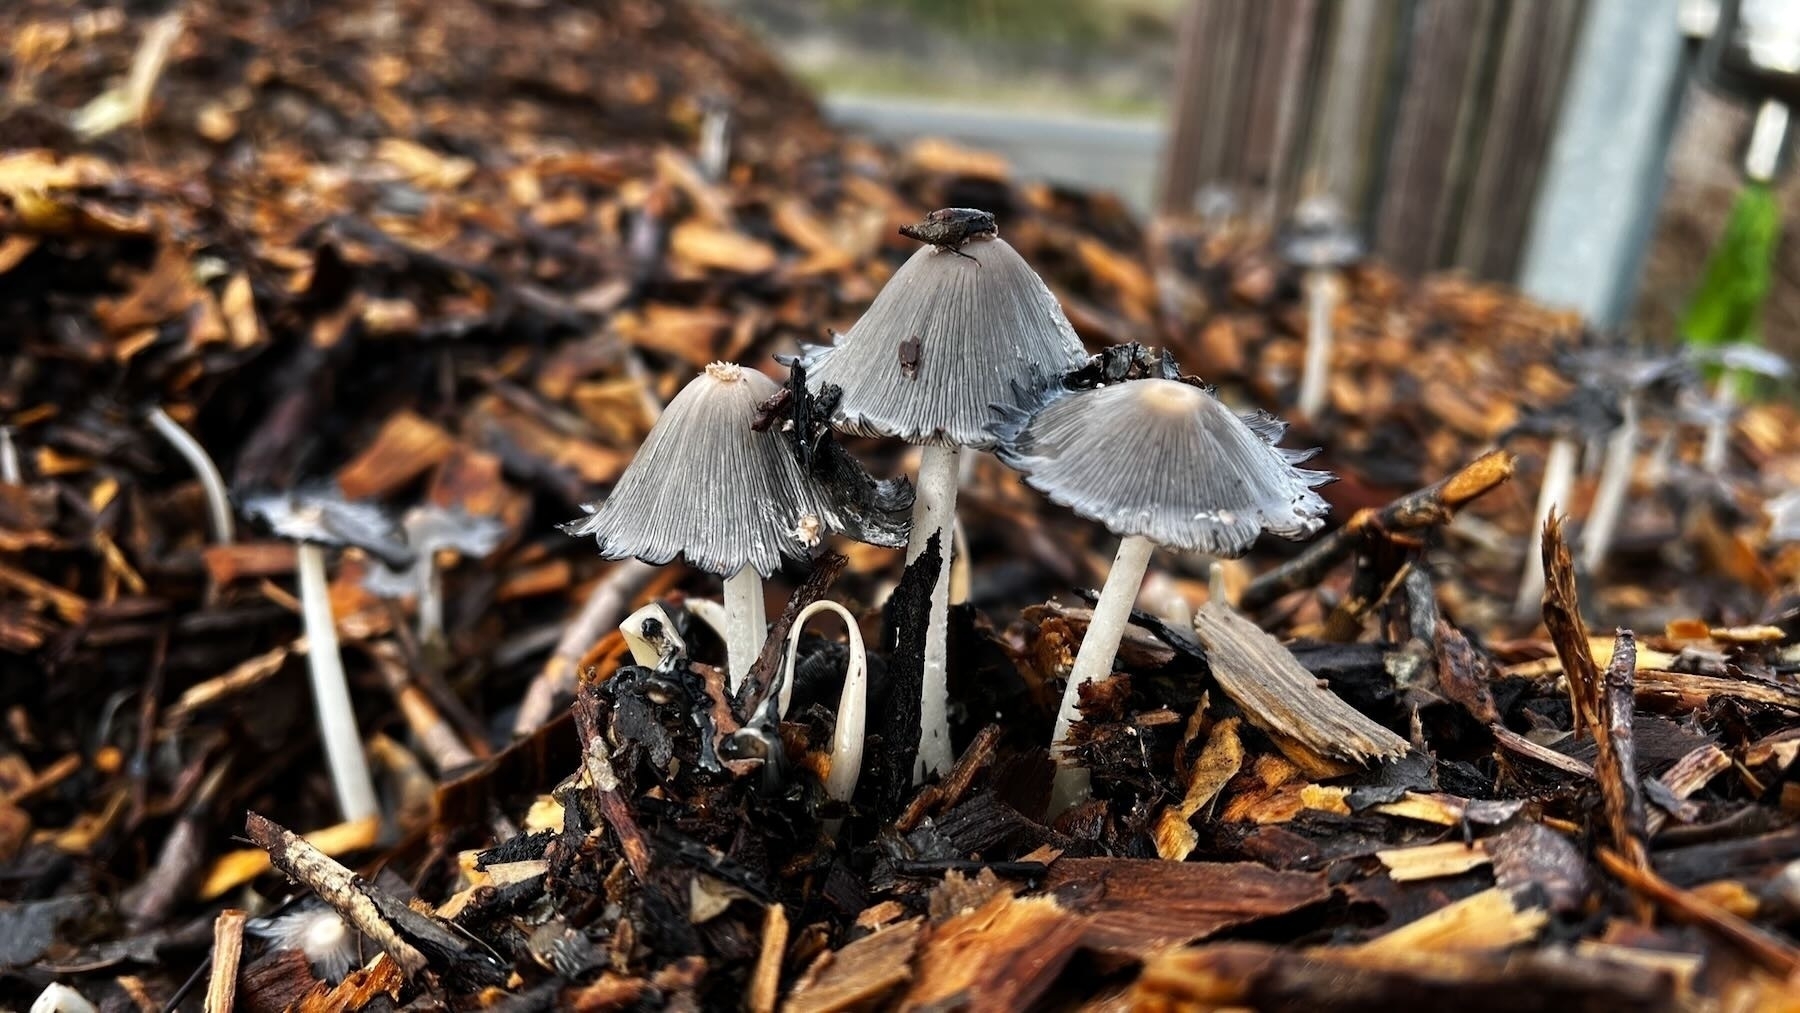 Several grey Fungi with pointed umbrella type caps.